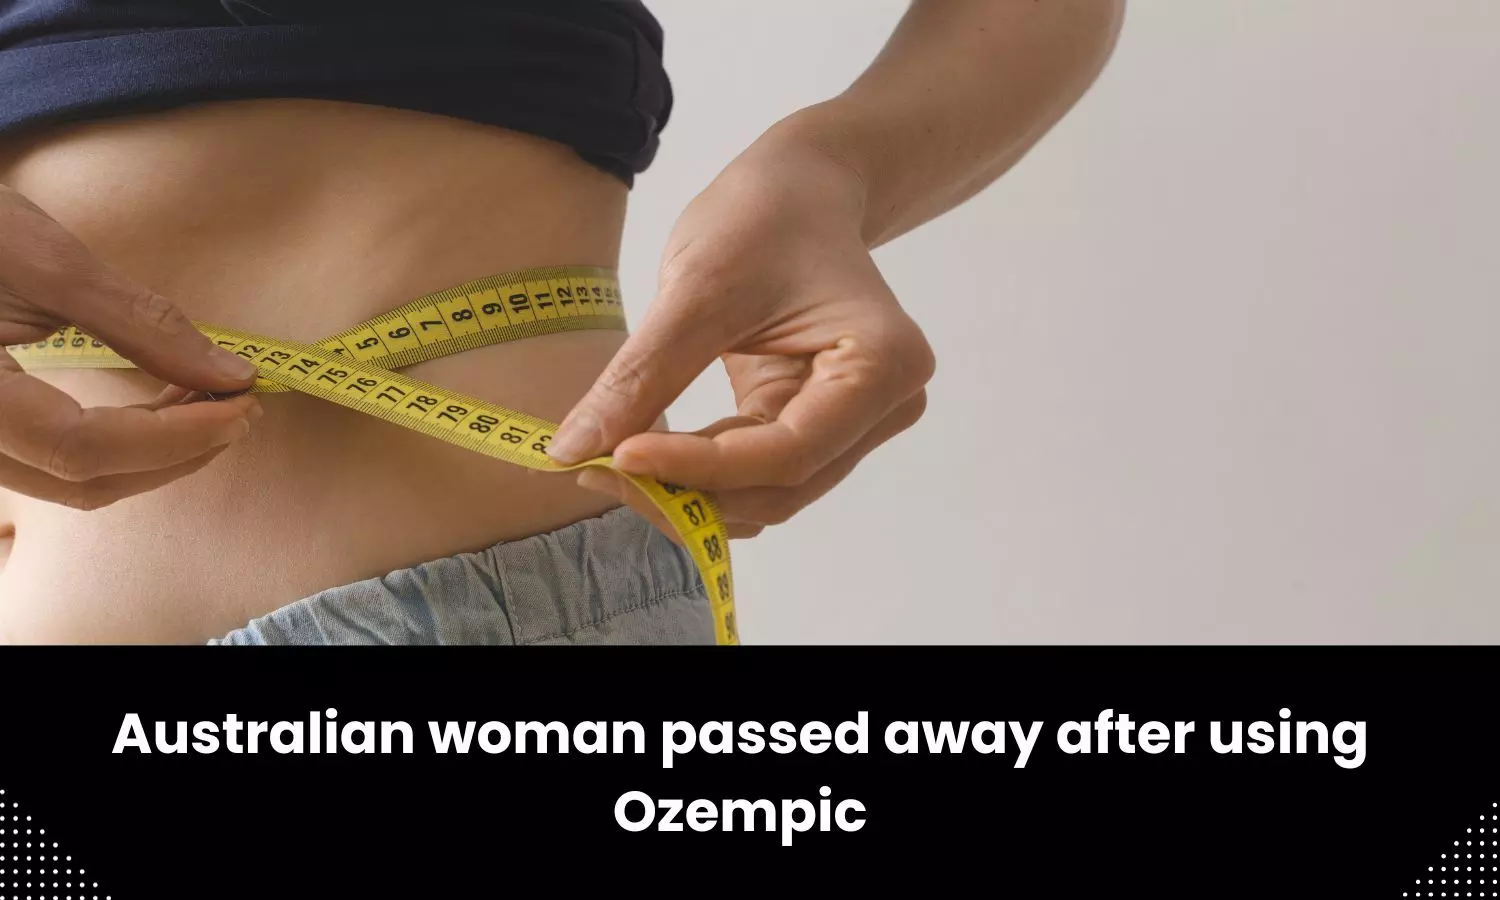 Australian woman passed away after using Ozempic